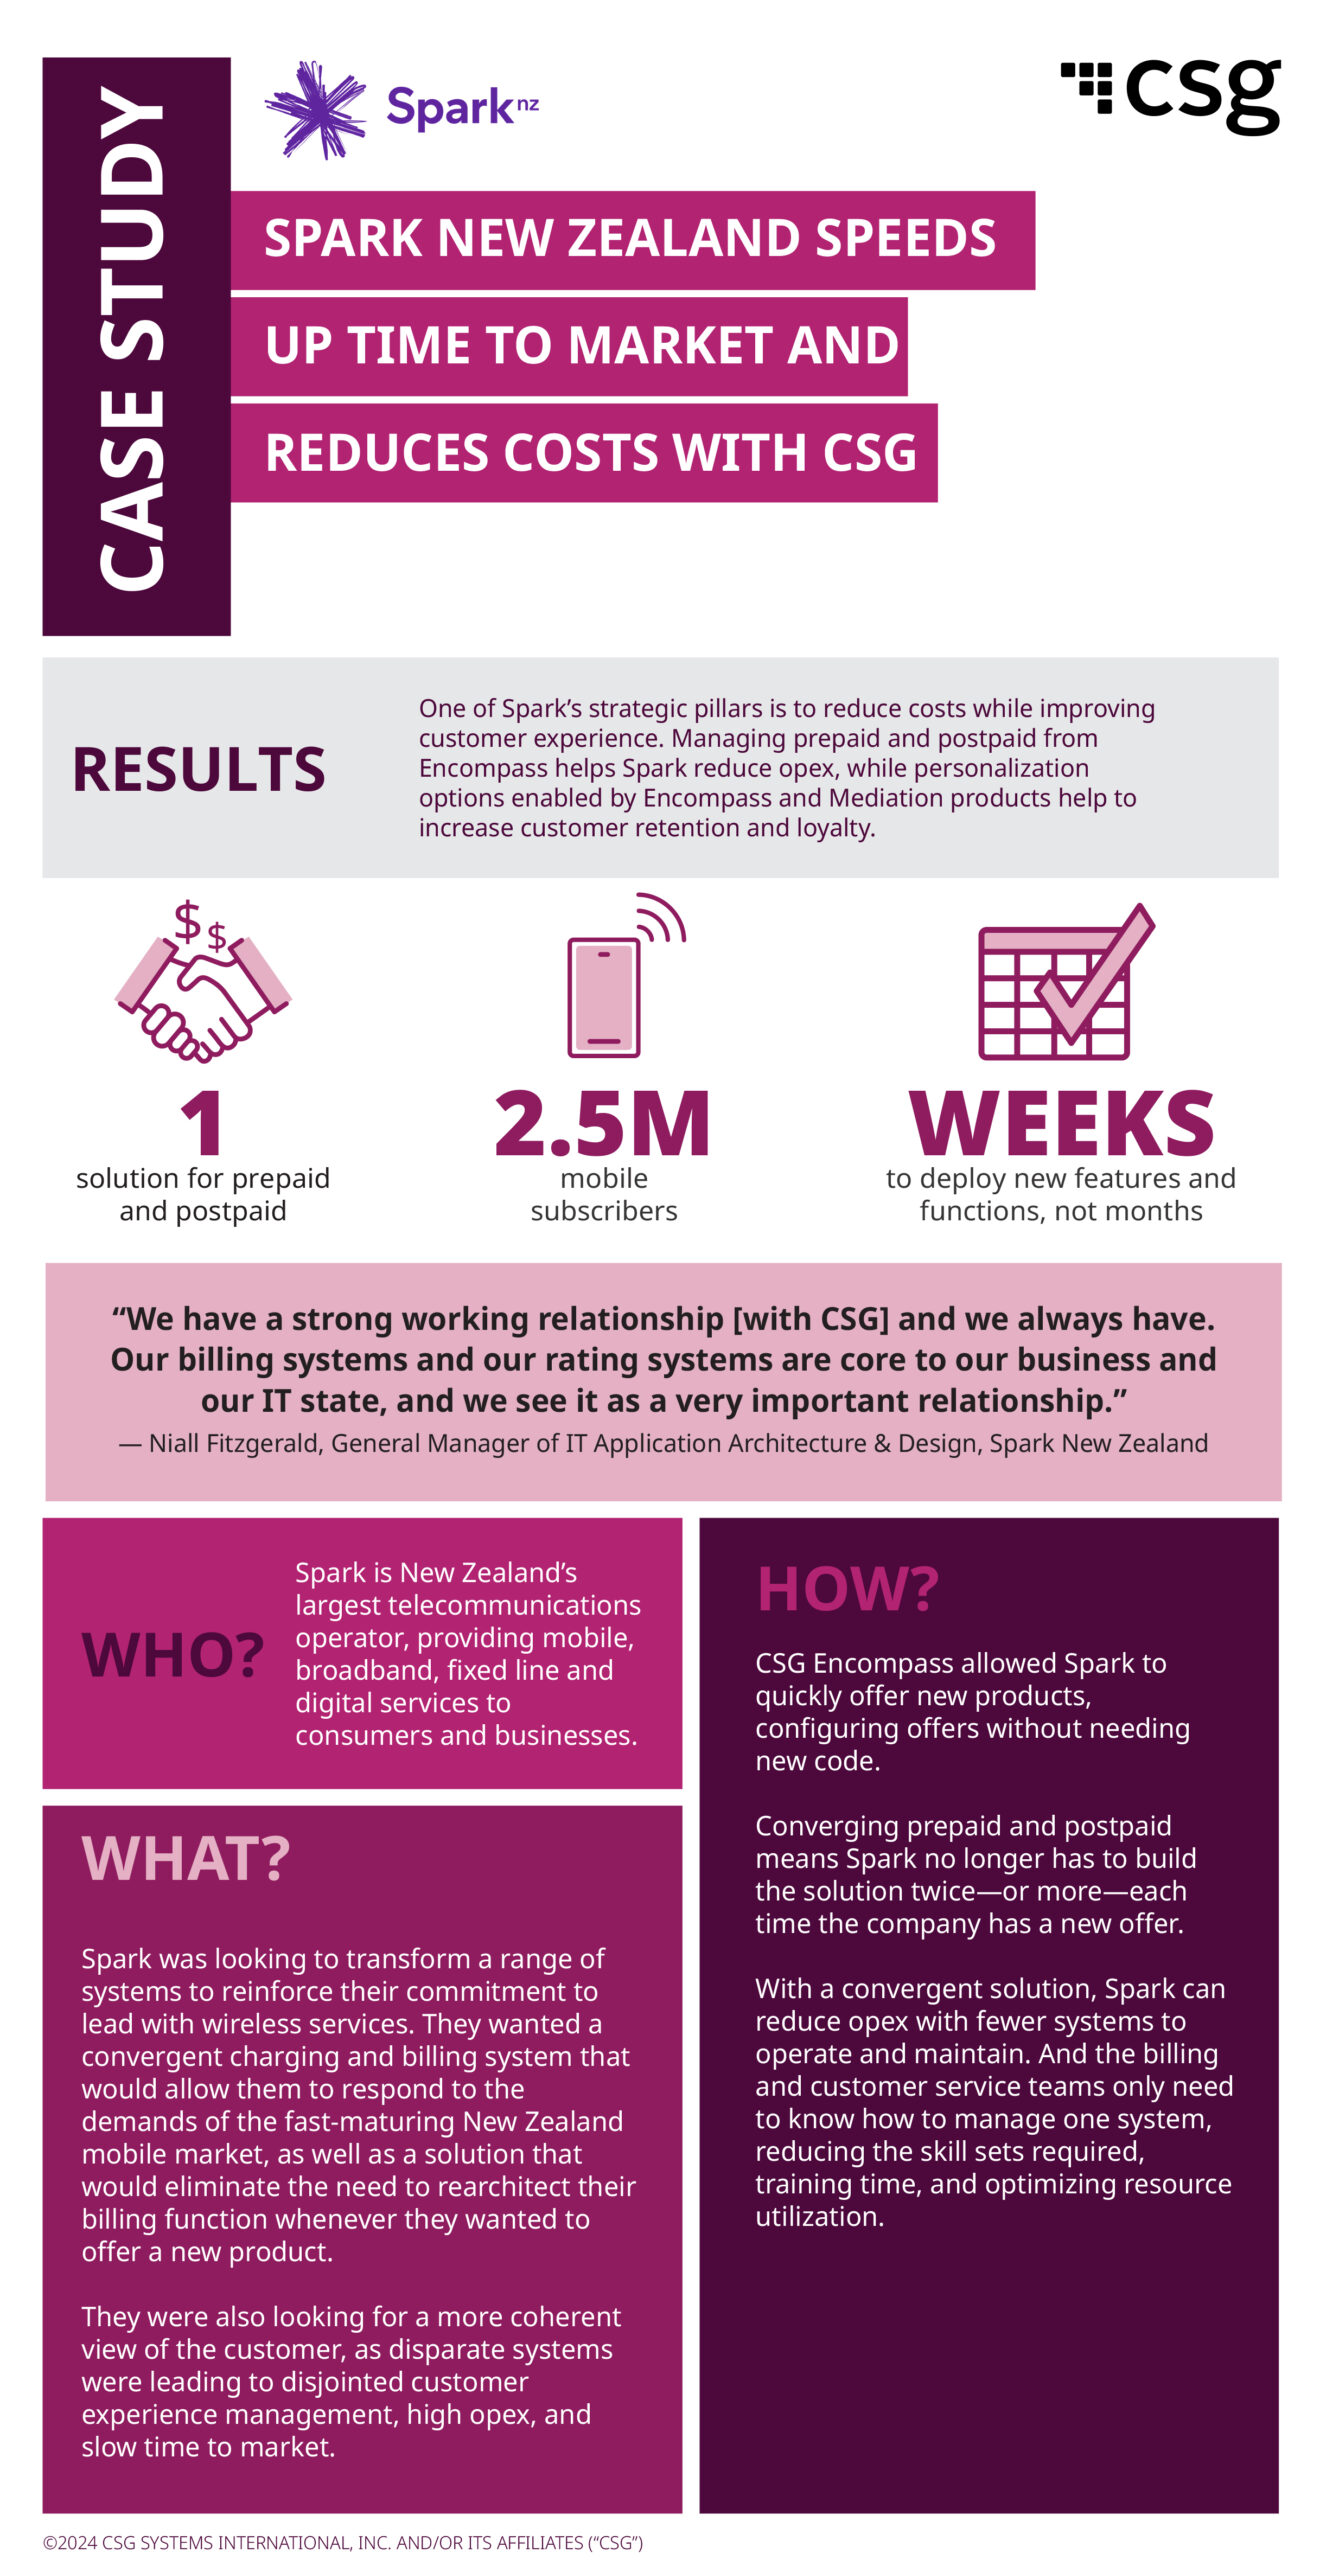 Spark New Zealand Speeds Up Time to Market and Reduces Costs Case Study Infographic